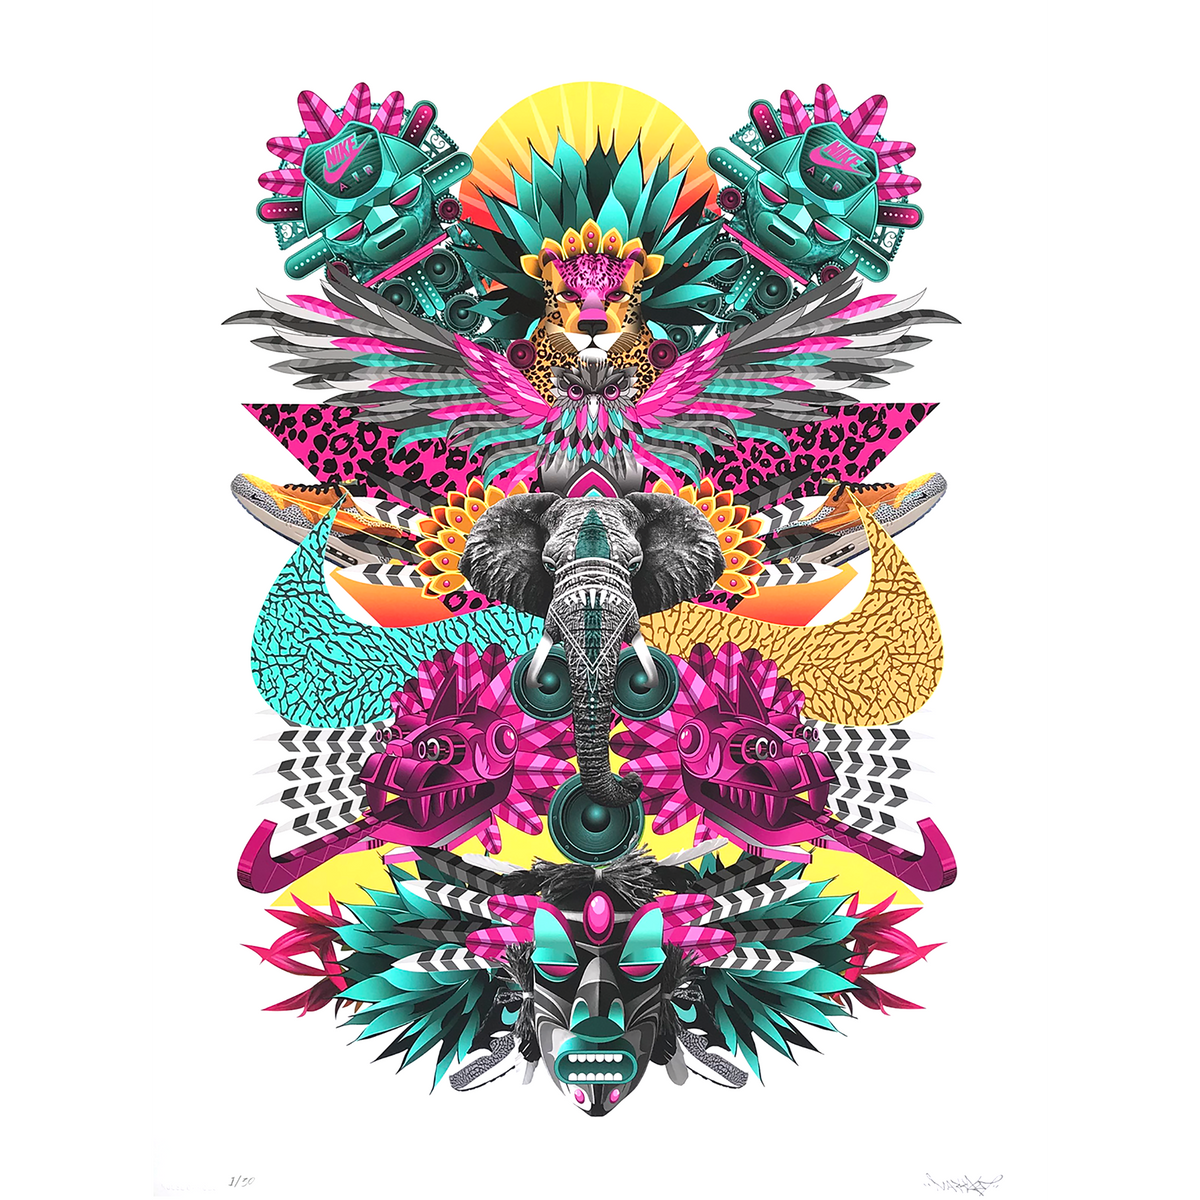 Marka27 &quot;NATIVE FLOW&quot; - Archival Print, Limited Edition of 30 - 18 x 24&quot;